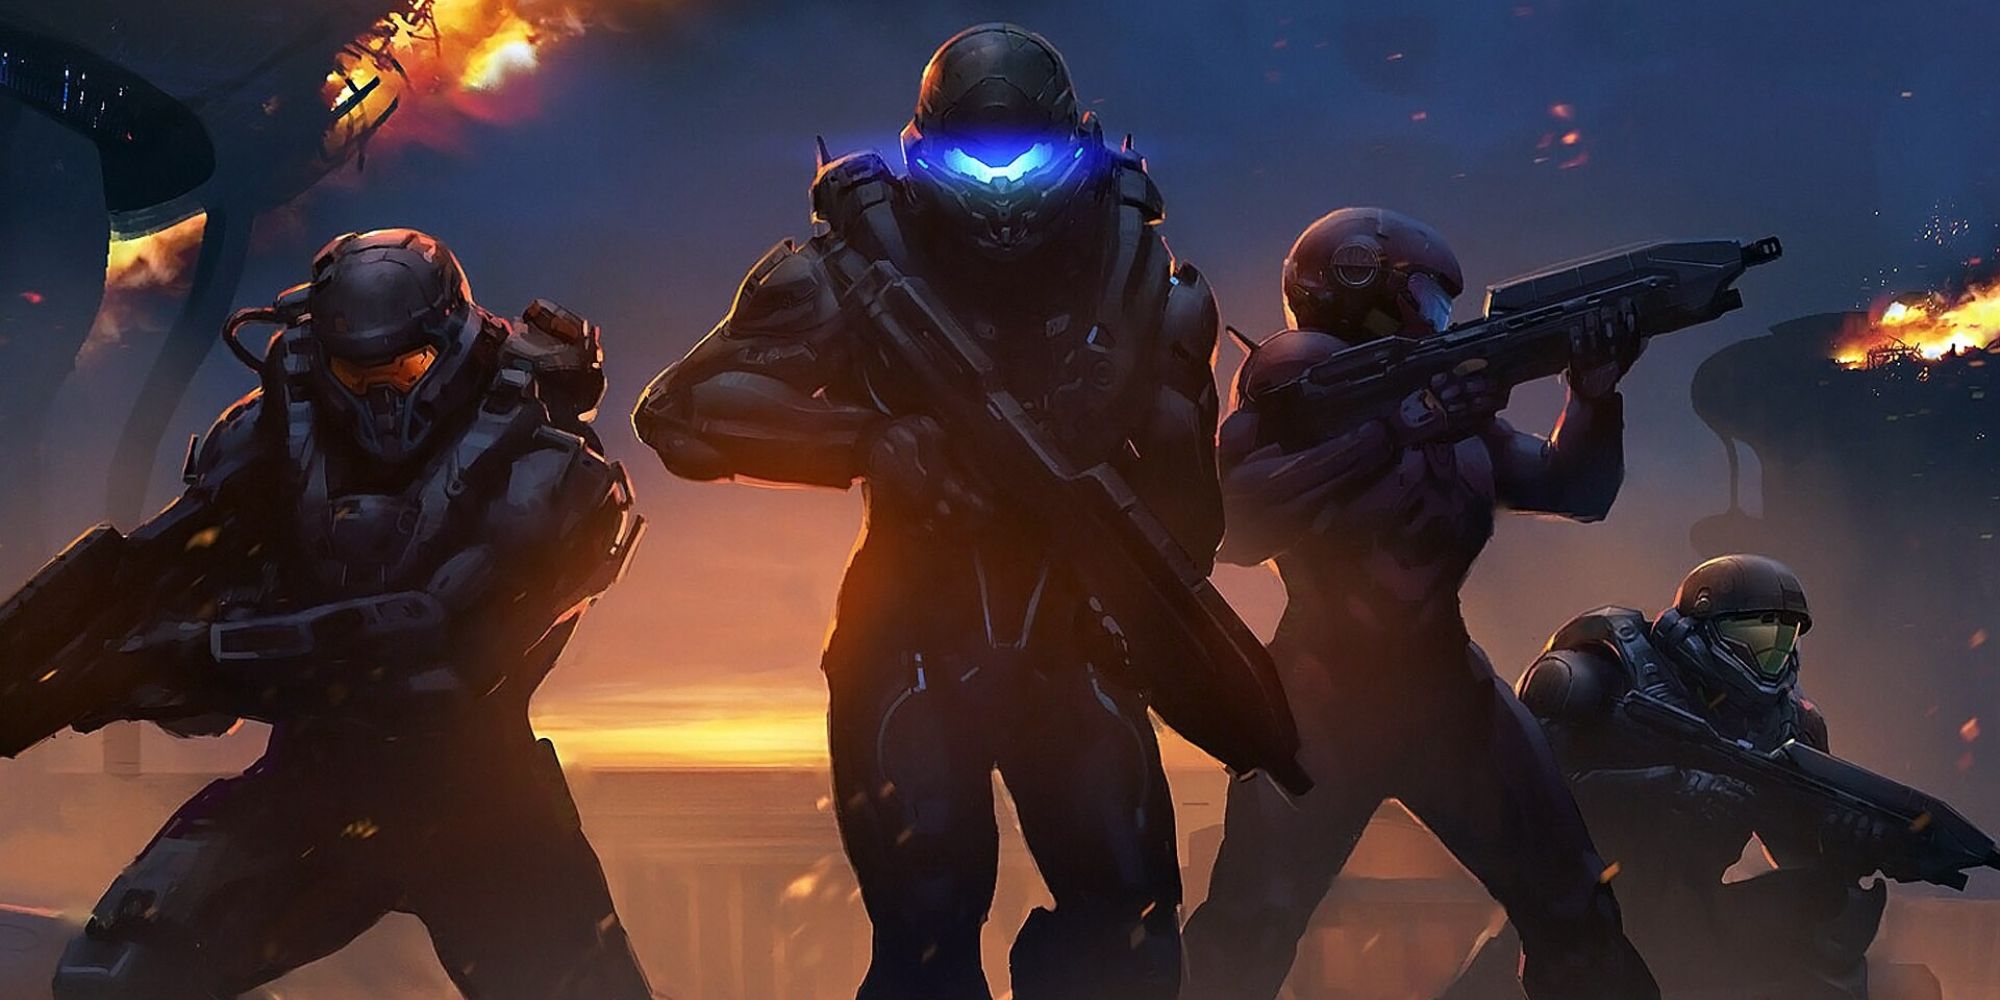 Team of Spartans from Halo 5